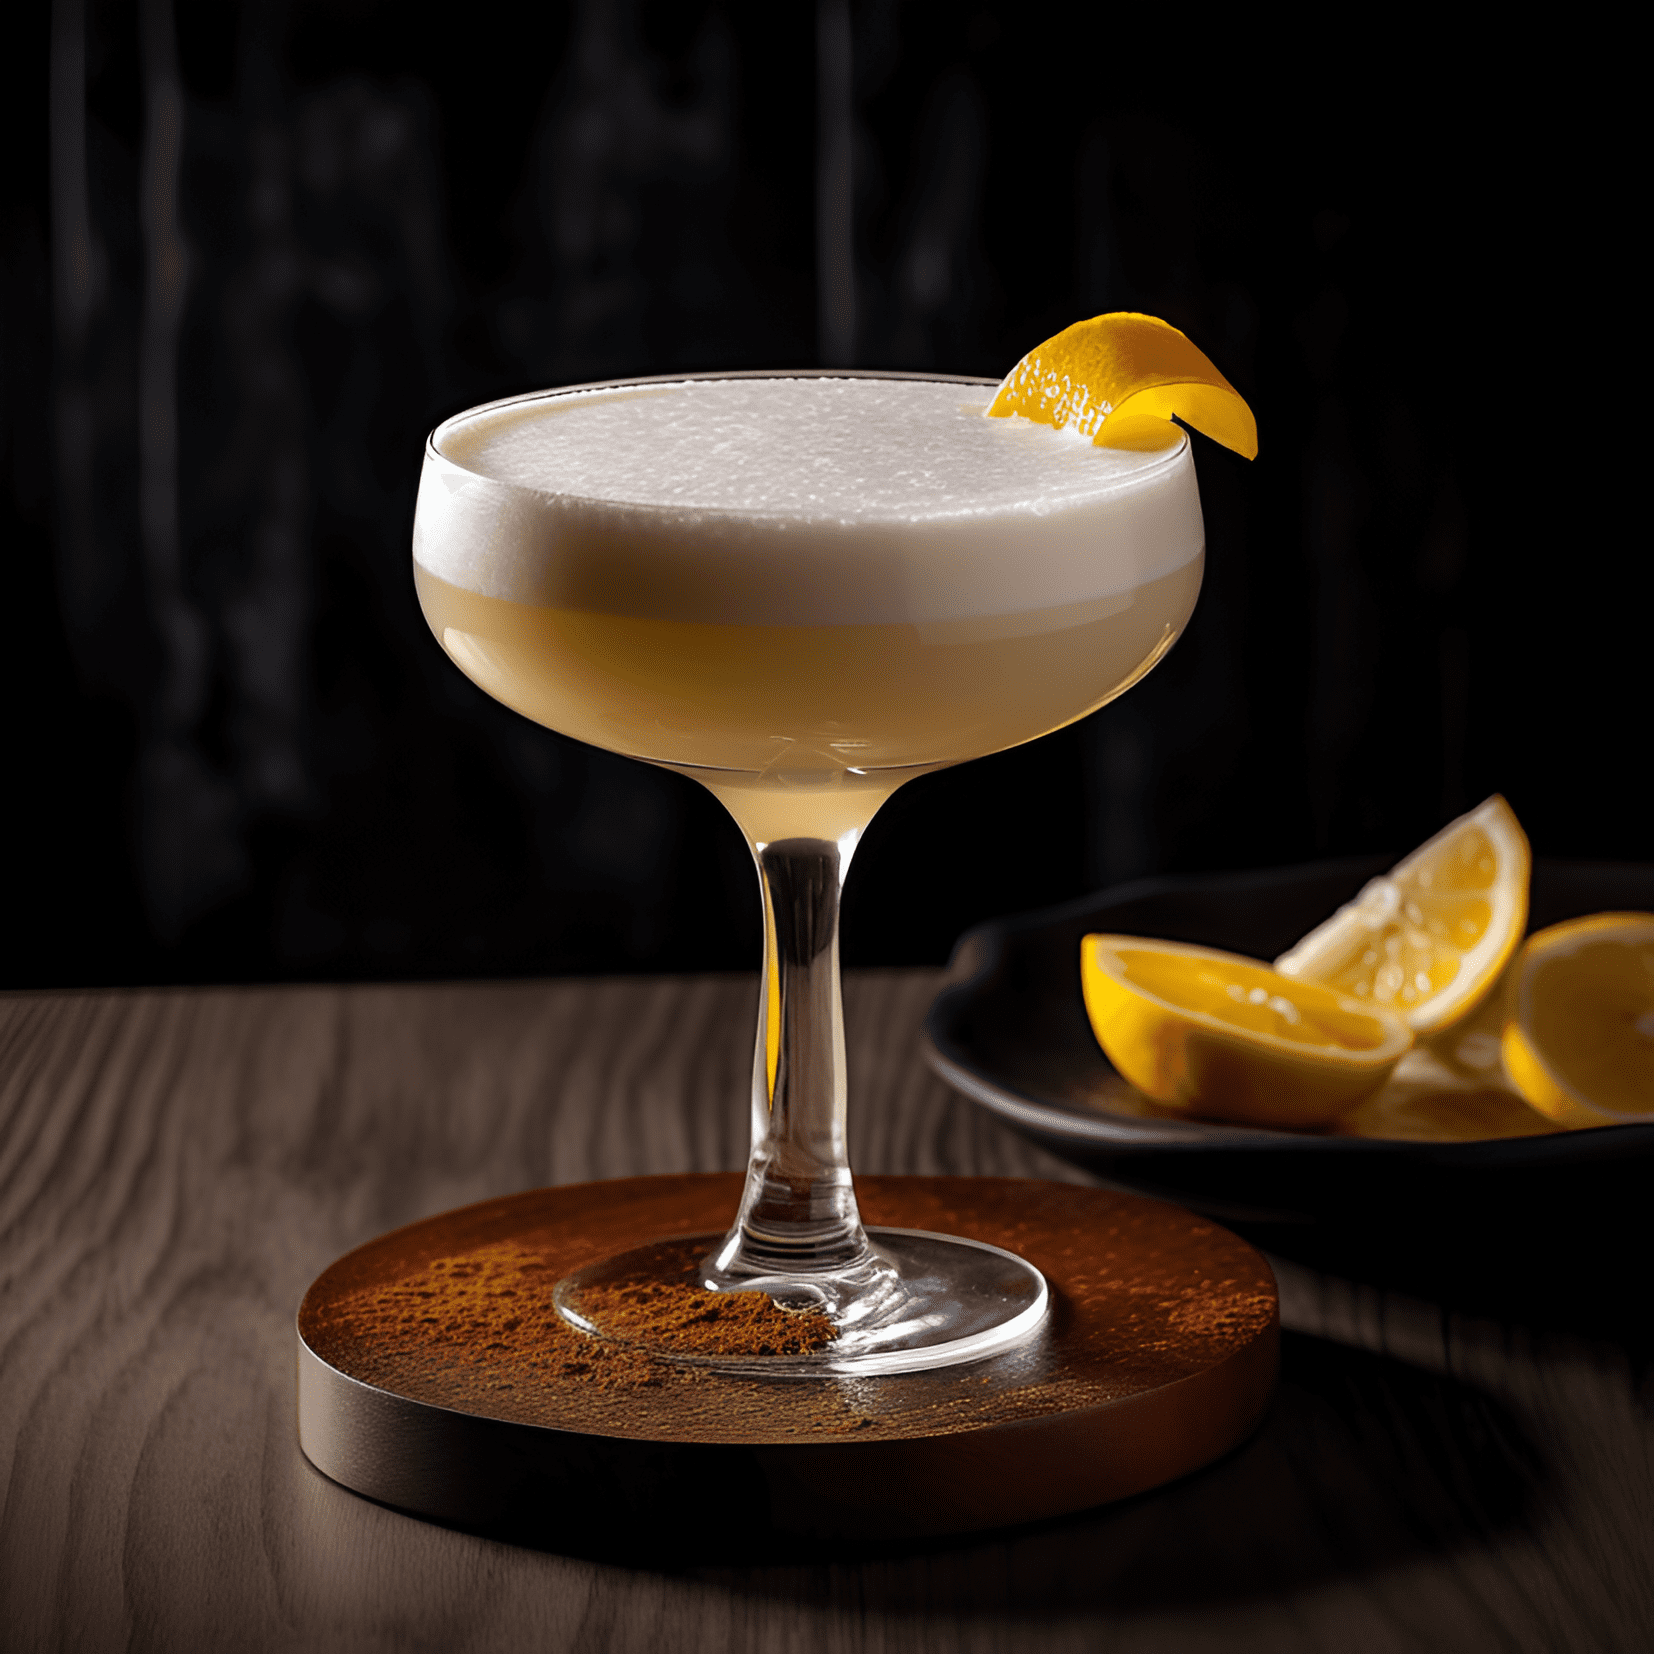 Tequila Sour Cocktail Recipe - The Tequila Sour has a refreshing, tangy, and slightly sweet taste. The tequila provides a strong, earthy base, while the lemon juice adds a bright, citrusy sourness. The simple syrup balances the sourness with a touch of sweetness, and the egg white gives the cocktail a smooth, frothy texture.